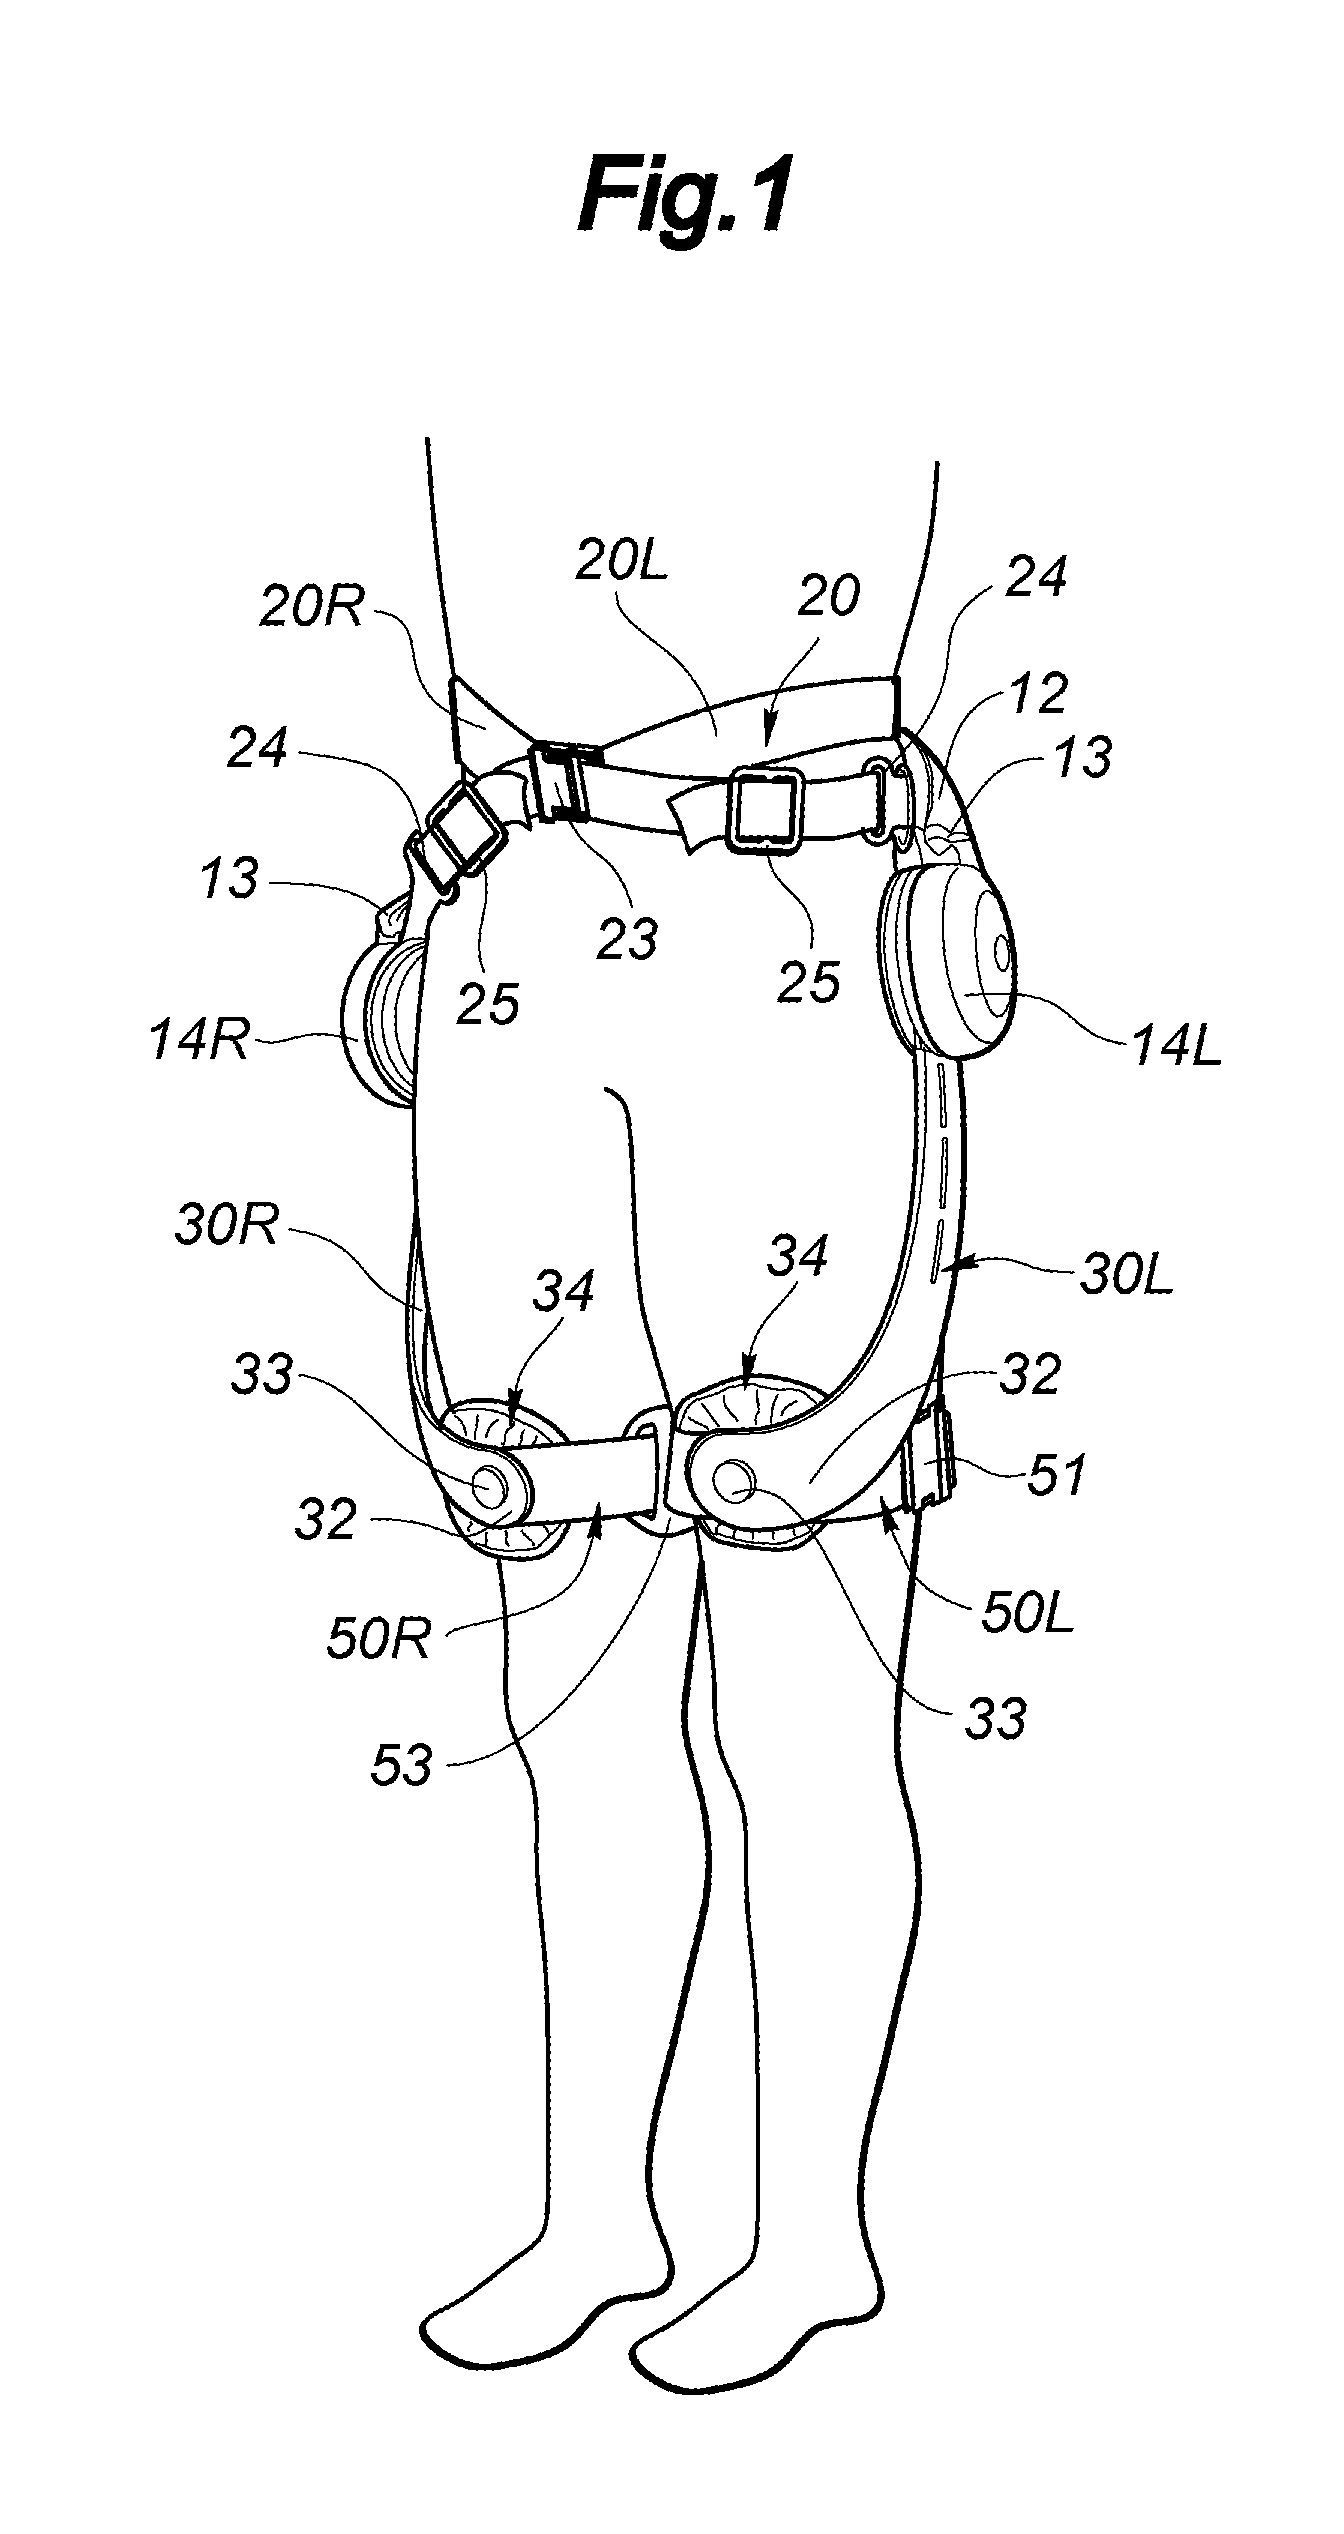 Walking assistance device for providing a walking assistance force to a femoral part of a user